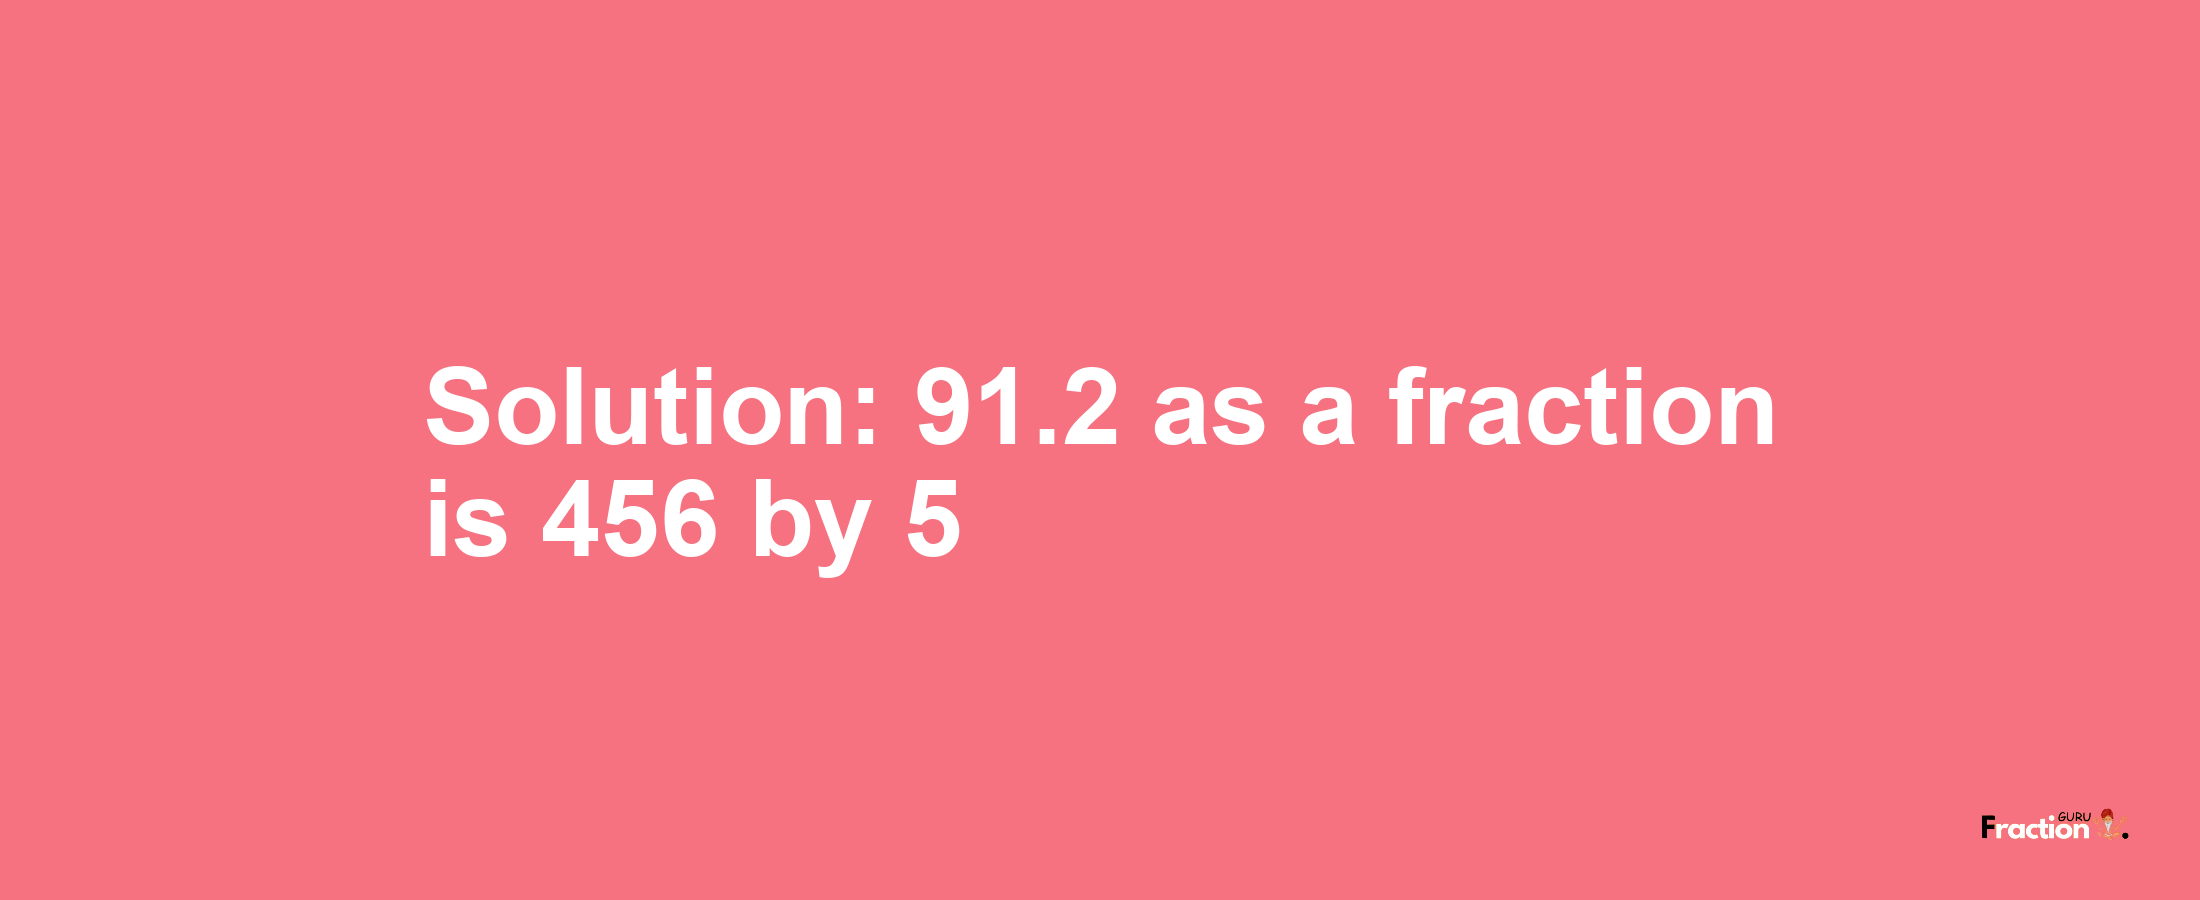 Solution:91.2 as a fraction is 456/5